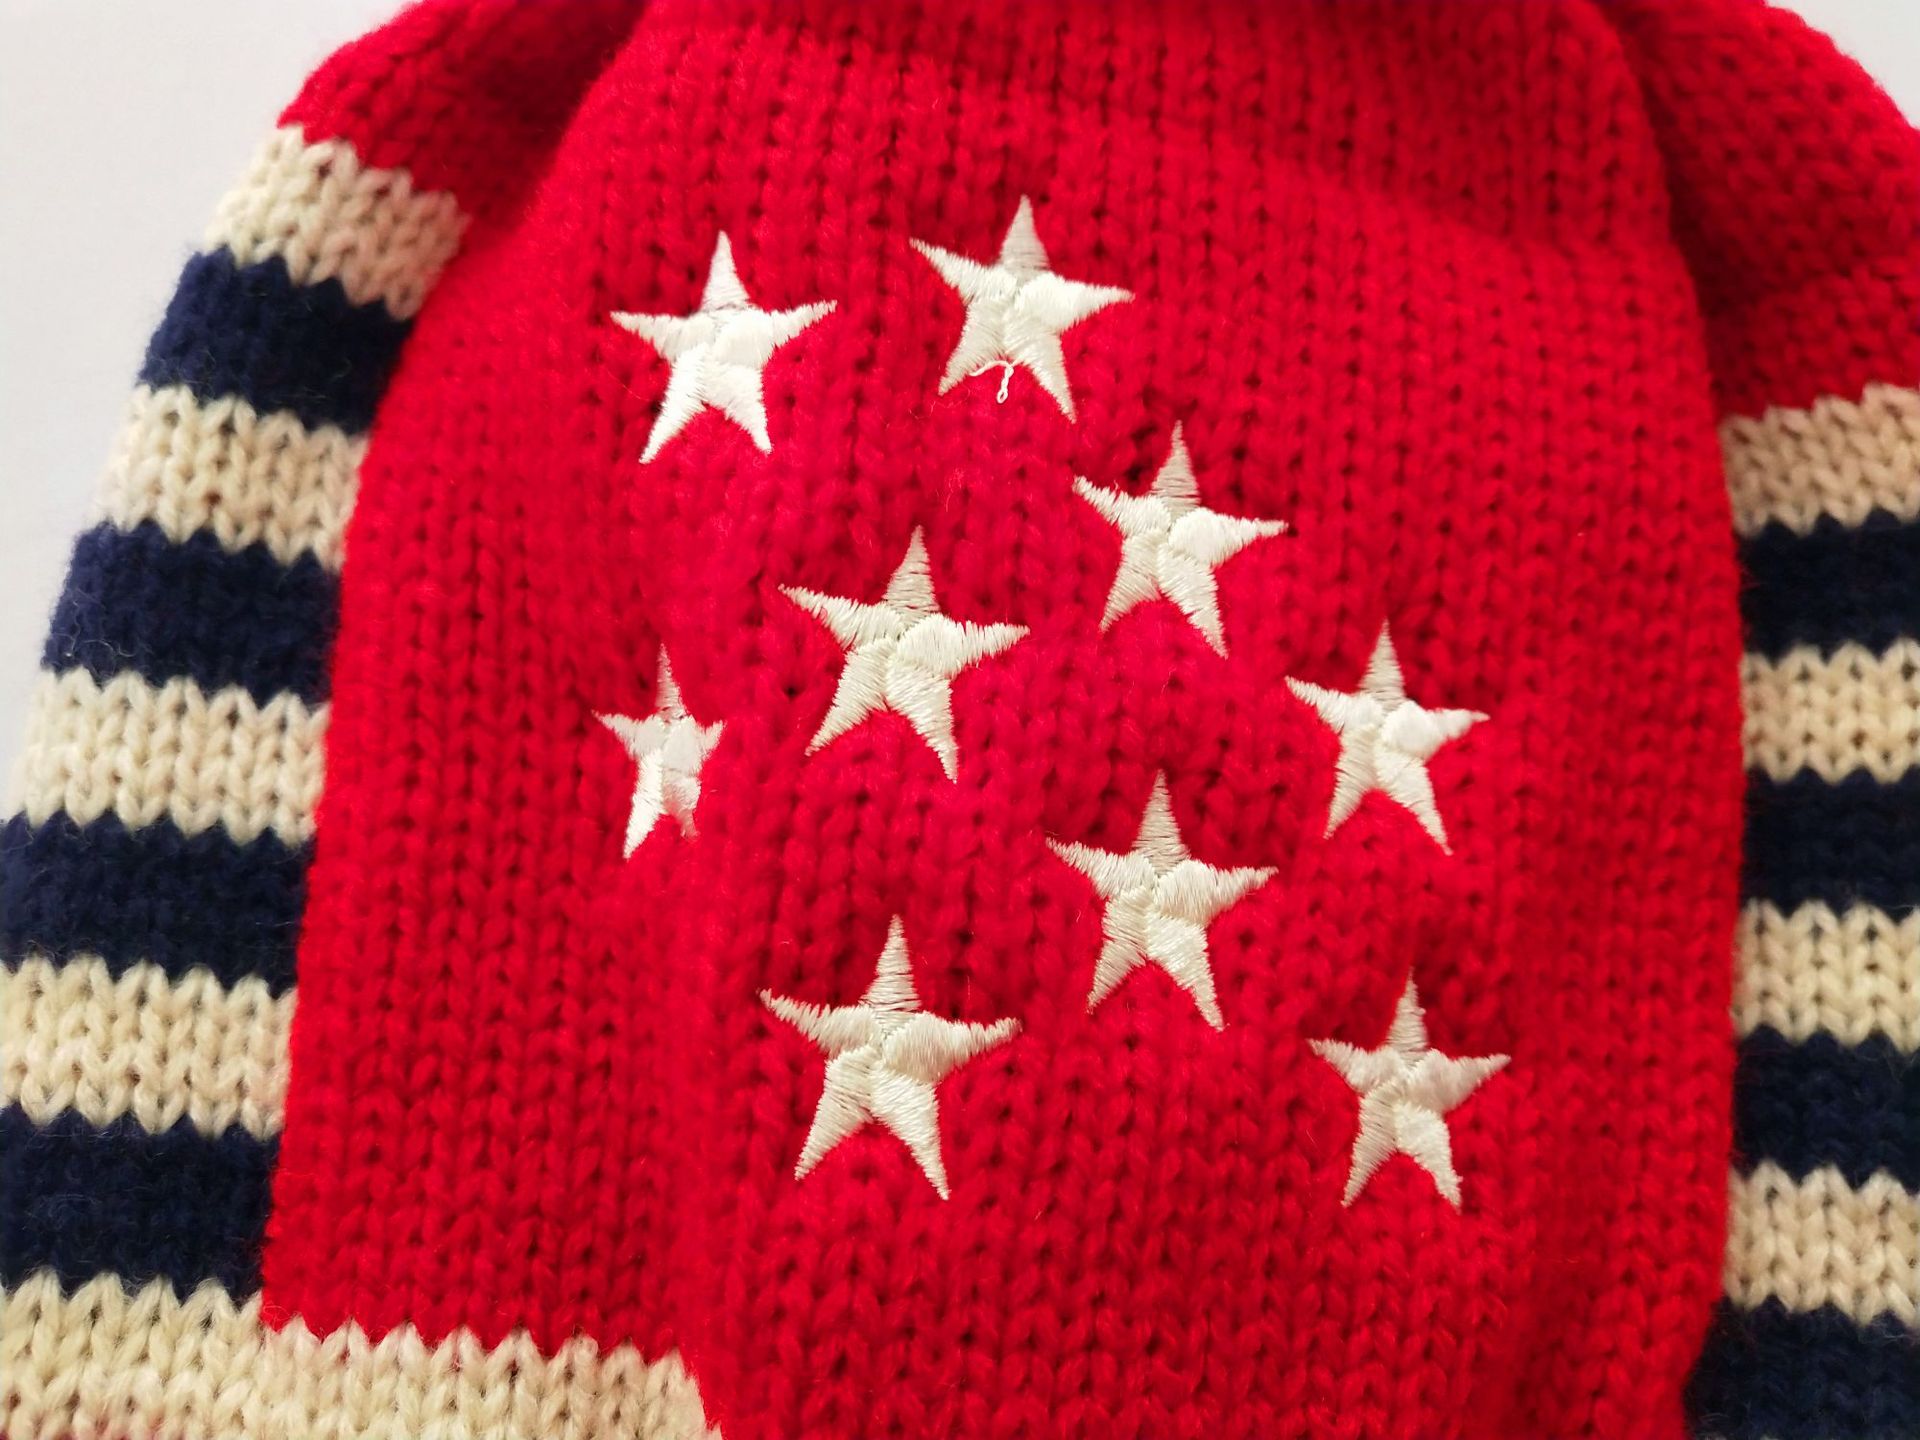 Cross-Border Knitted Hat Source Manufacturers Customize US Stars and Stripes Wool Hat to Map and Sample Foreign Trade Order Production